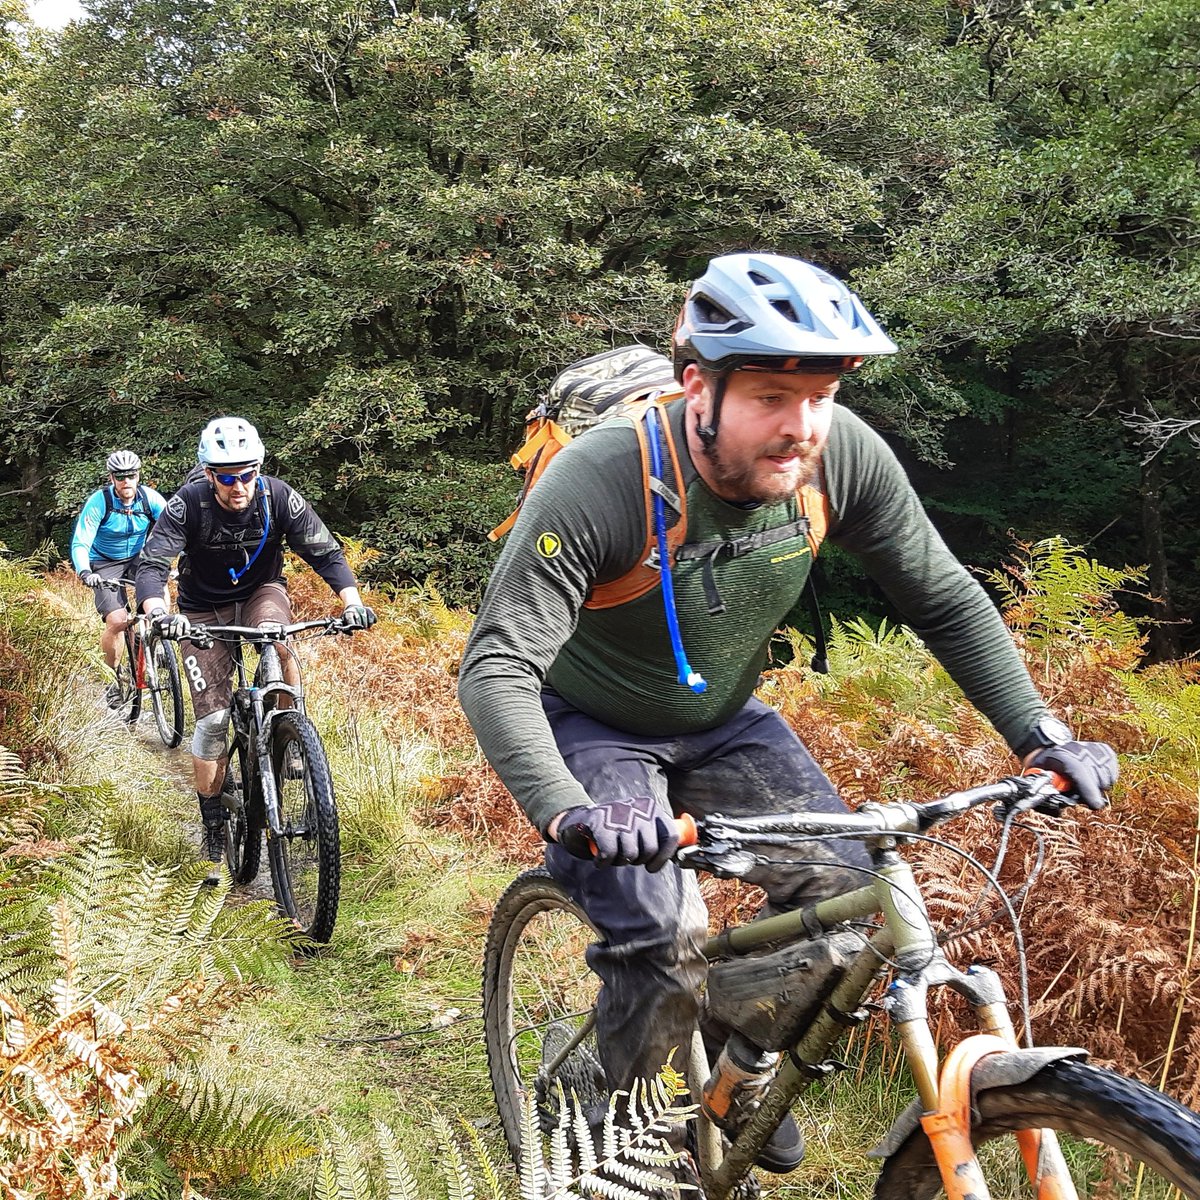 Final day through the Cambrian Mountains is always a brilliant ride and an enjoyable challenge, especially in great autumn light.
#transcambrian #mtbleadership @mtbcymru